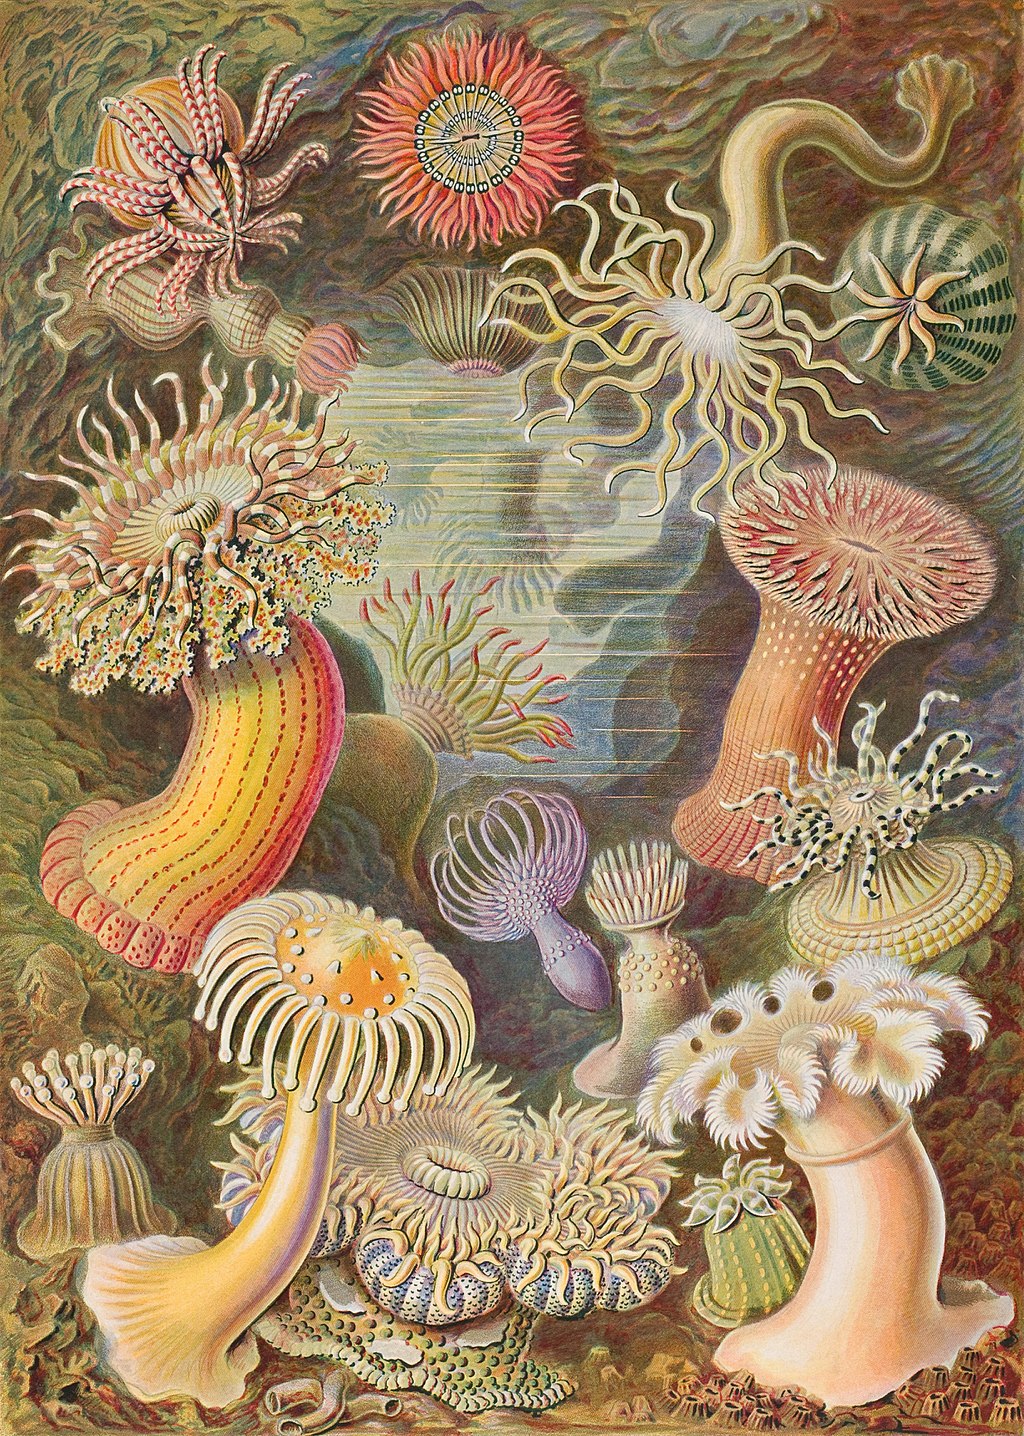 49th plate from Ernst Haeckel's Kunstformen der Natur of 1904, showing various sea anemones classified as Actiniae.